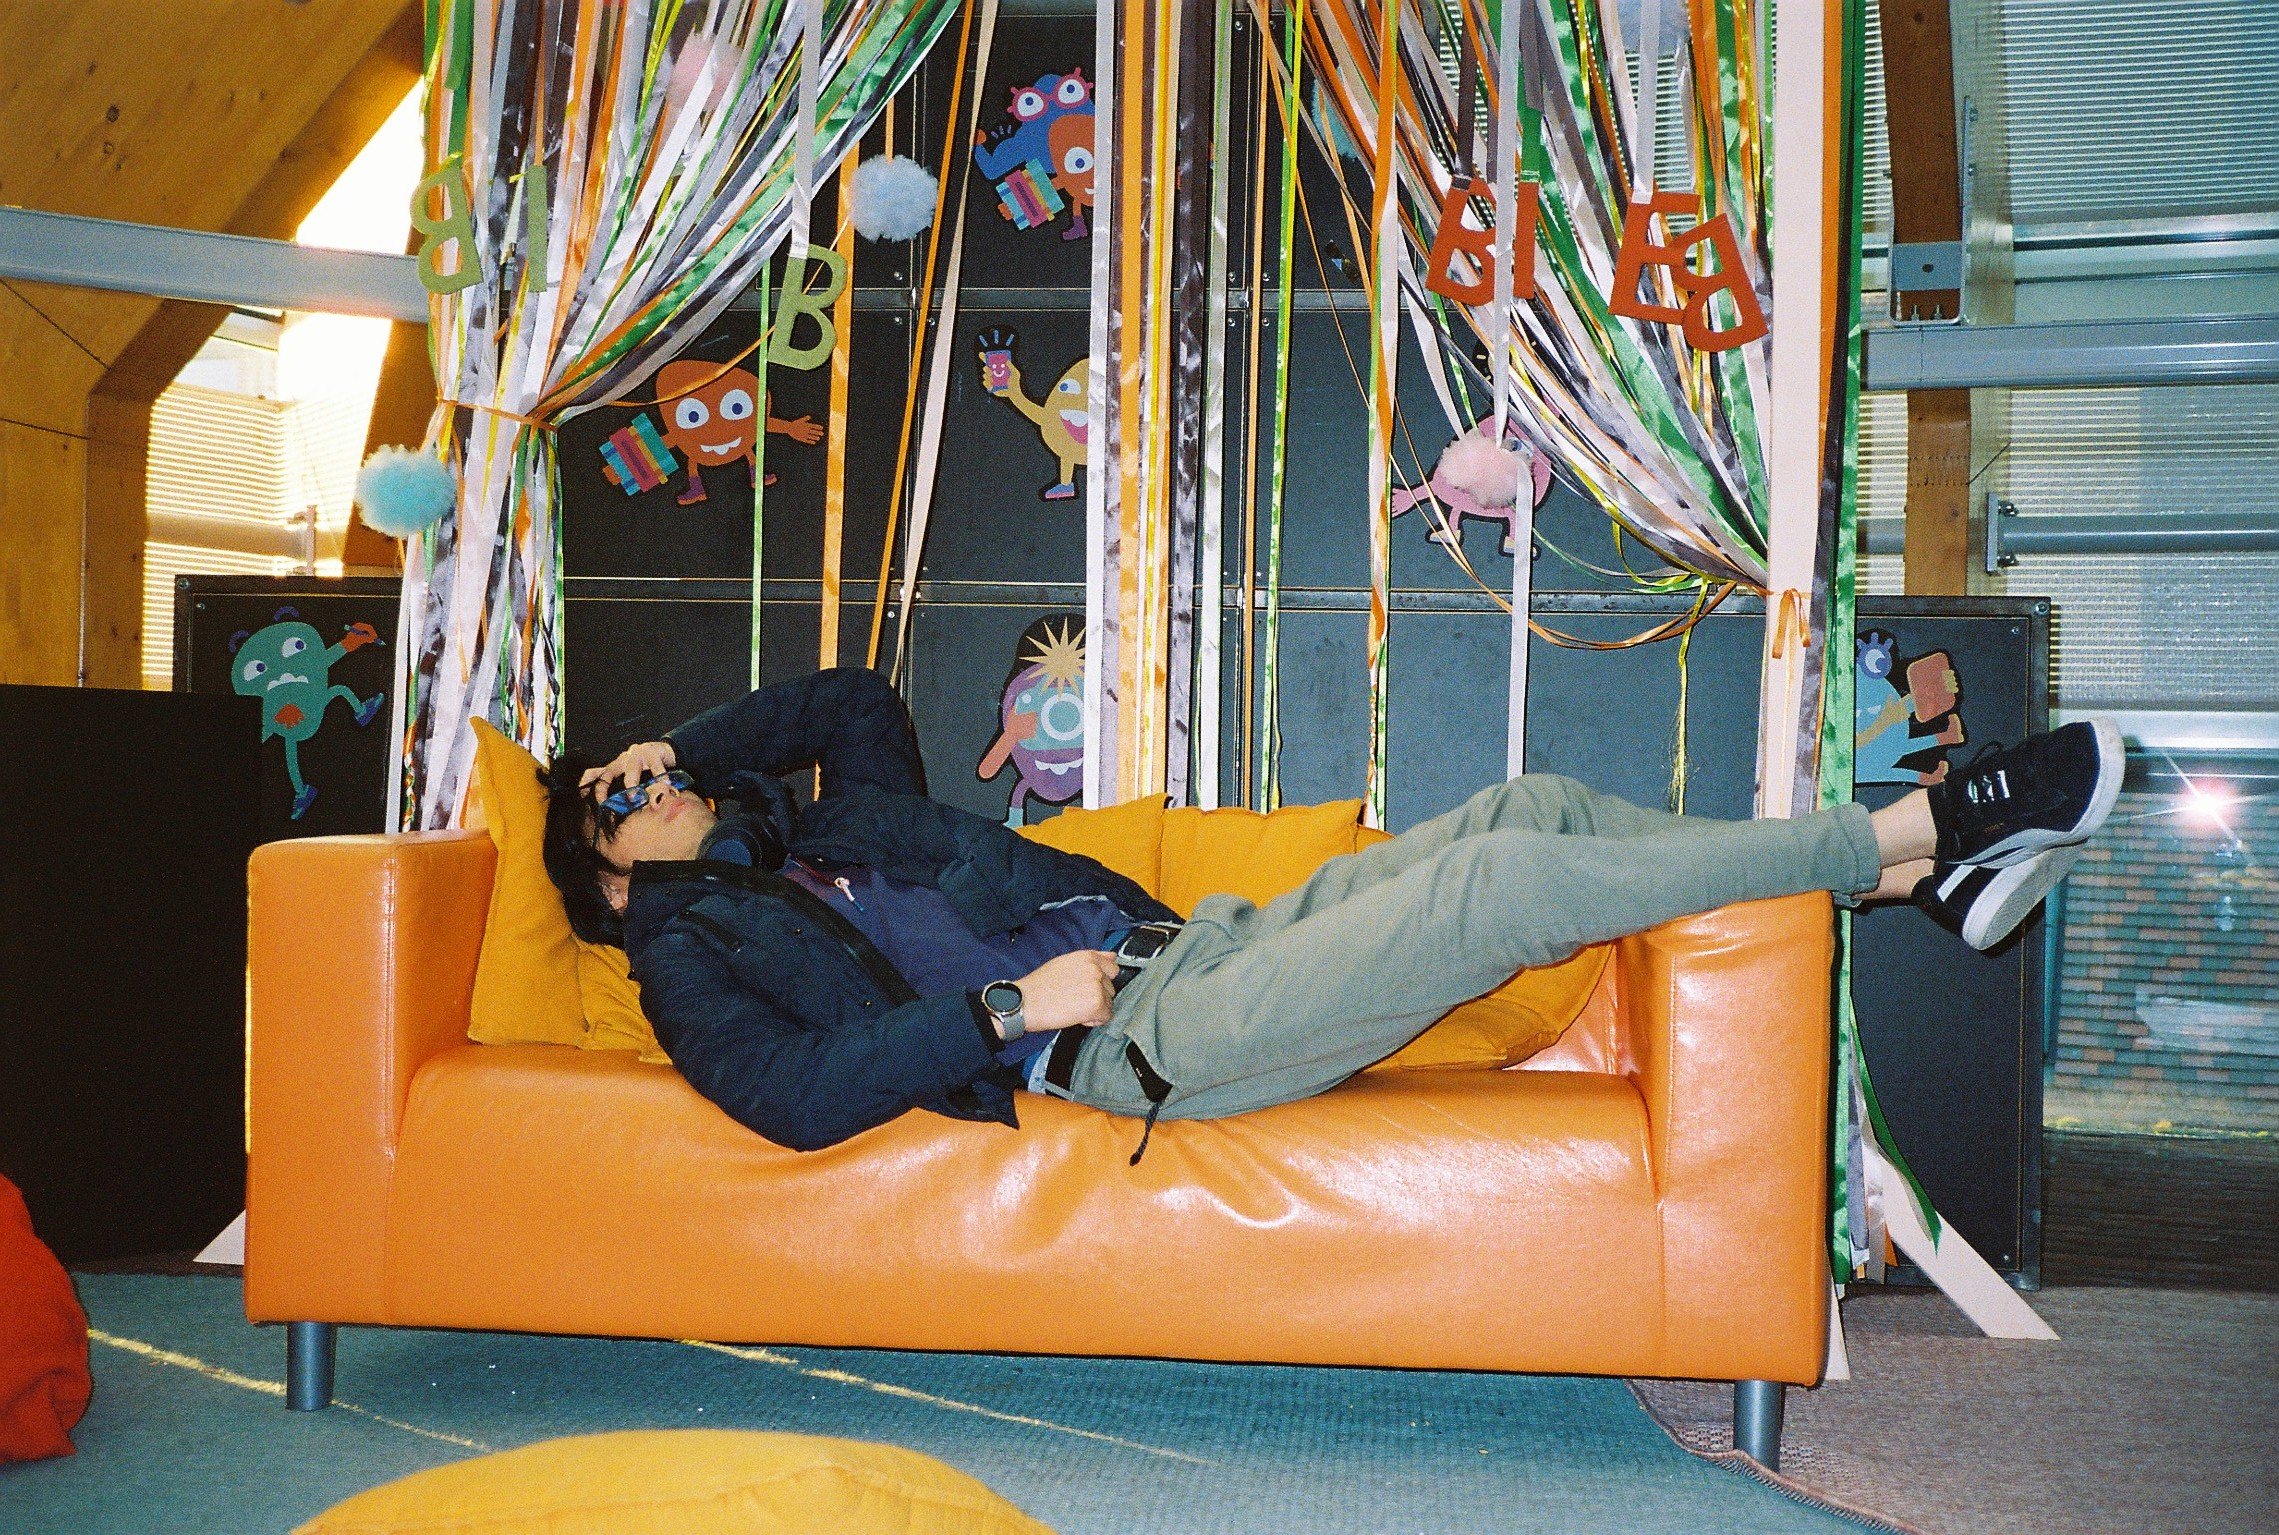 Trams brother laying in an orange sofa in front of colorful party decorations.